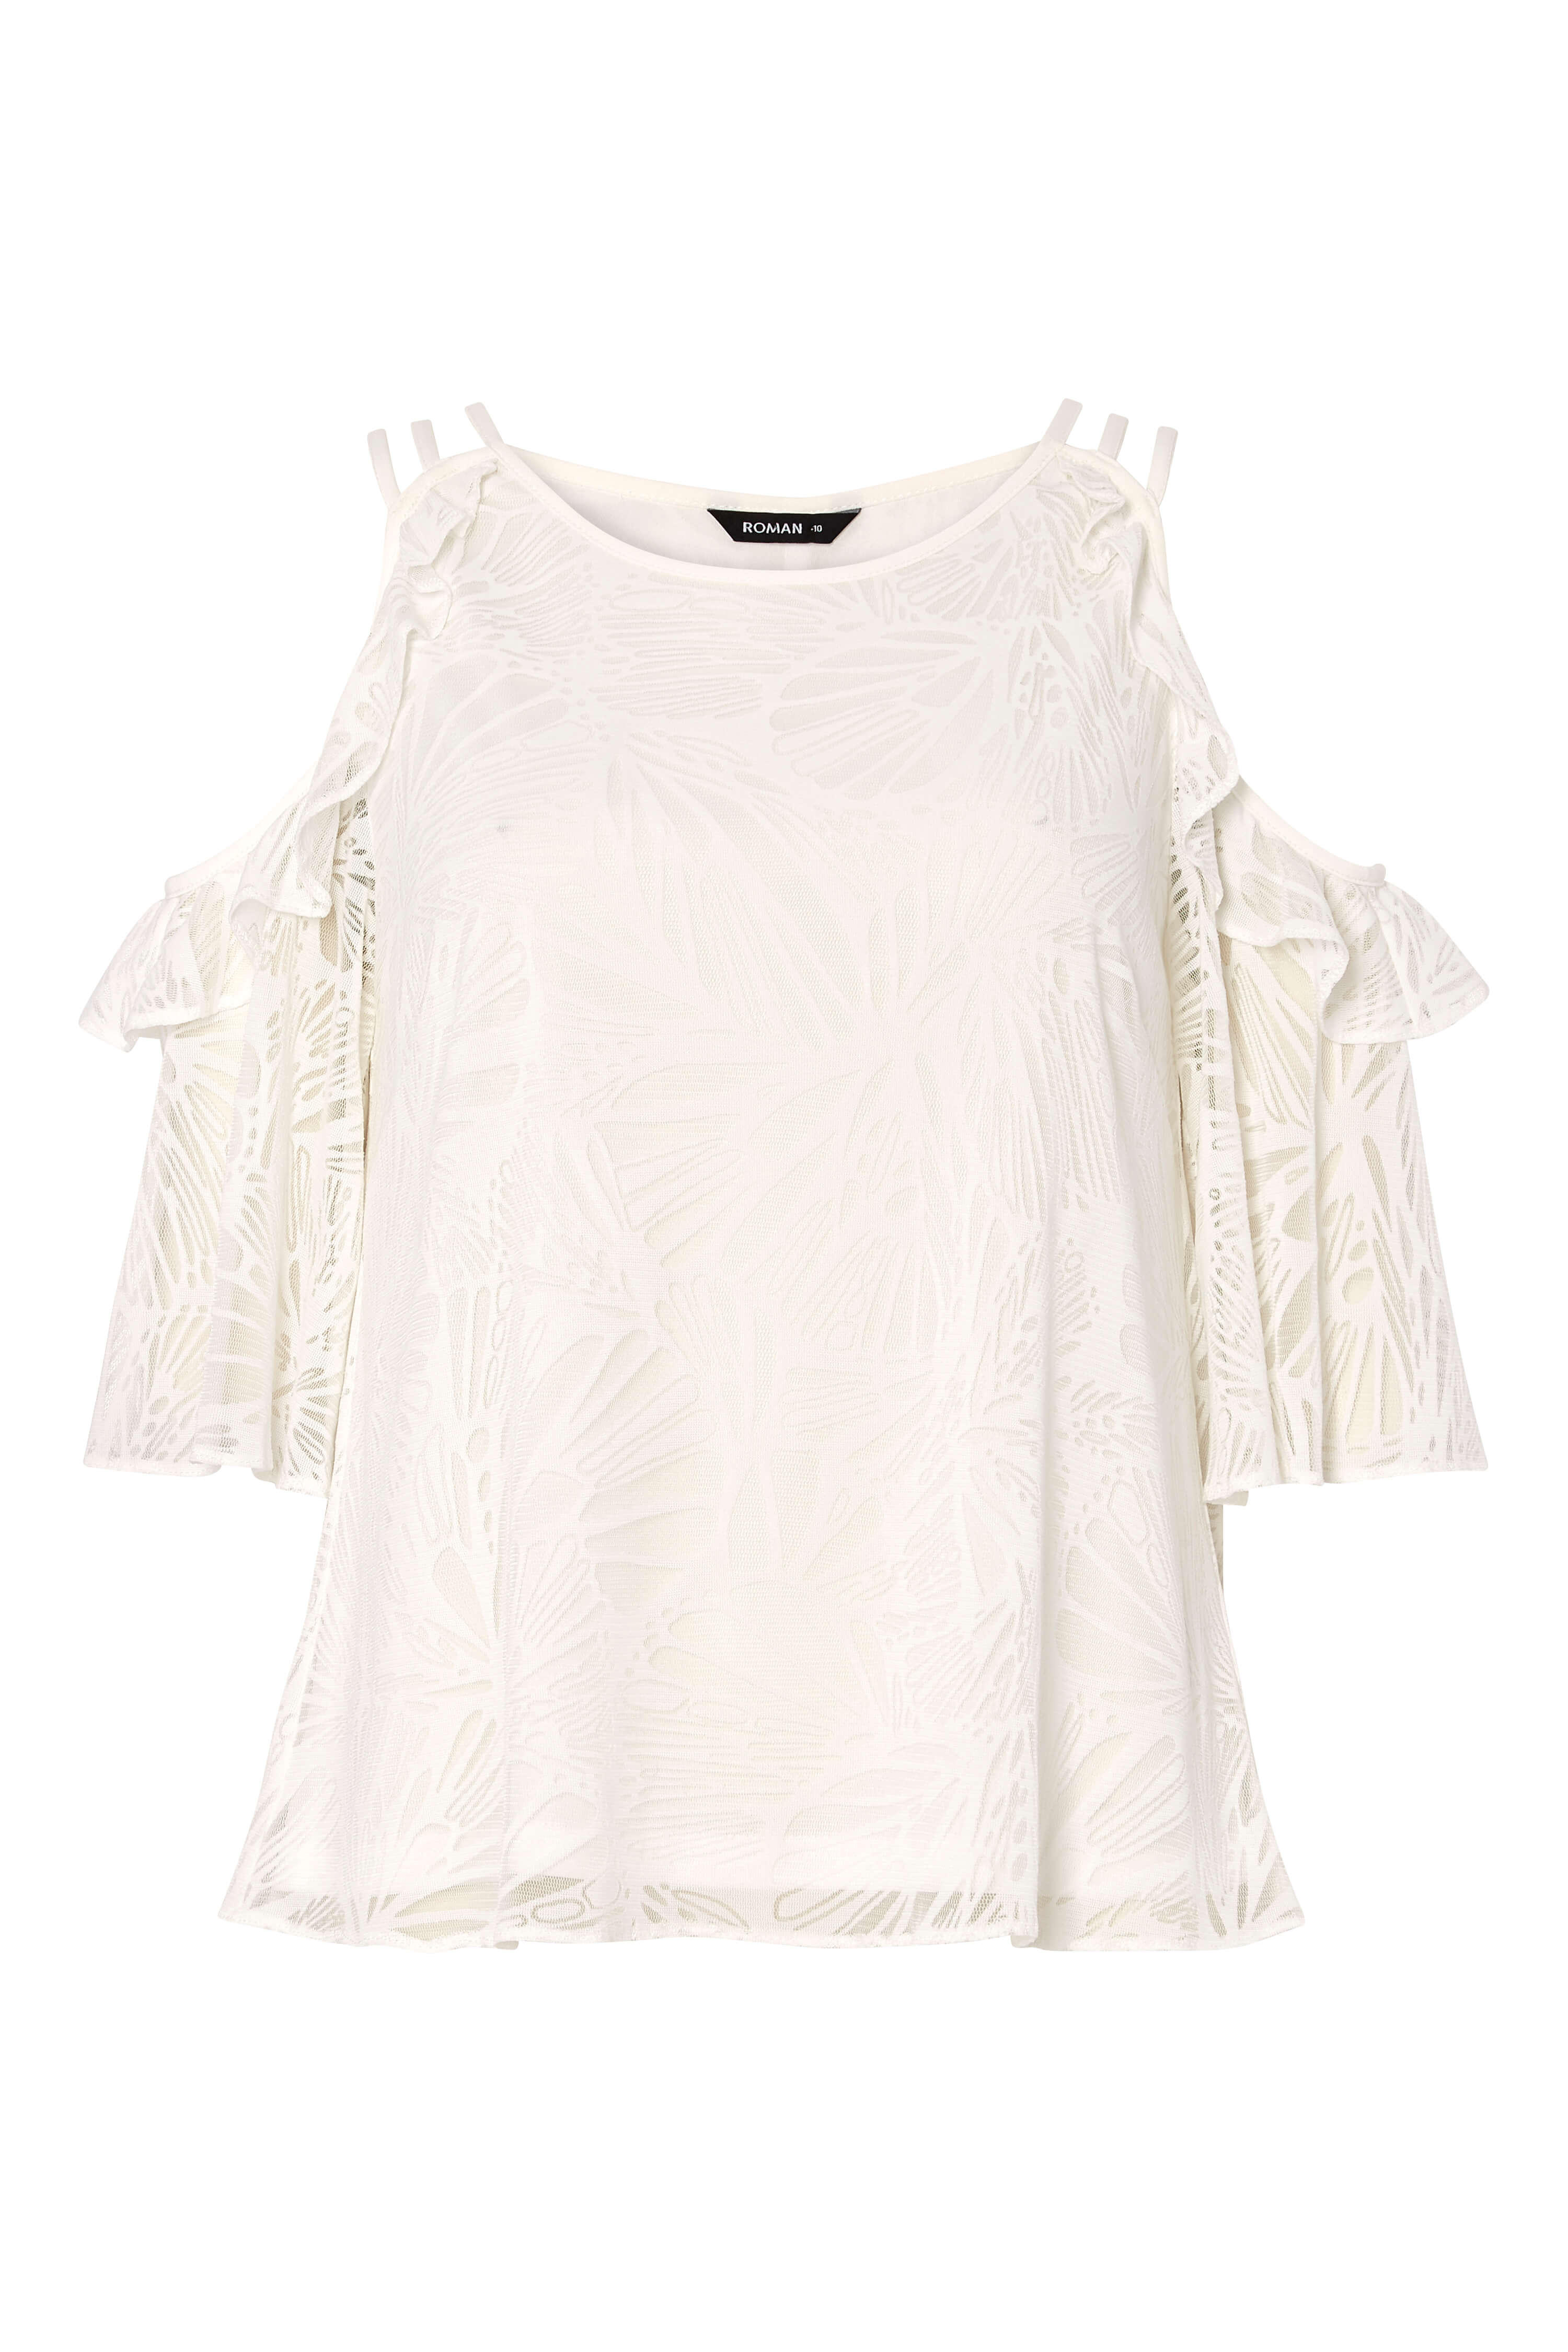 Ivory  Butterfly Print Cold Shoulder Top, Image 5 of 5